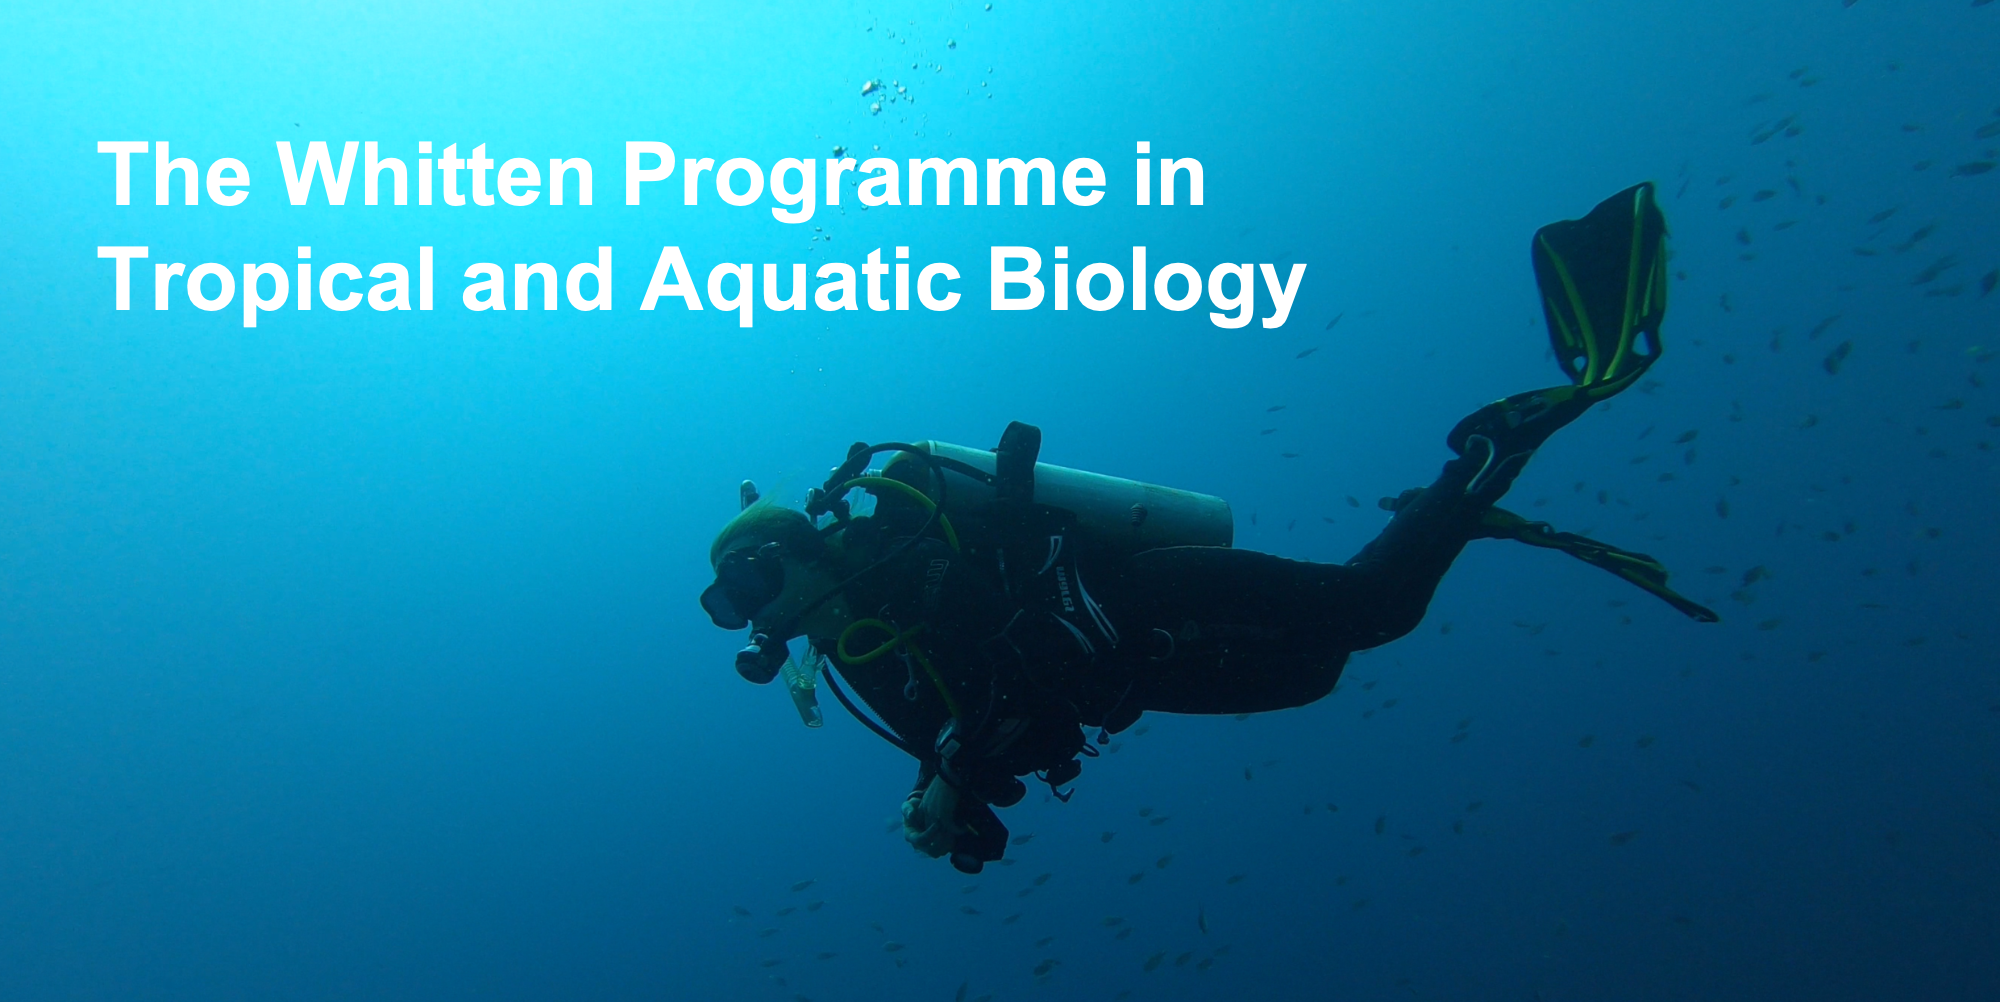 The Whitten Programme in Tropical and Aquatic Biology feature a scuba diver